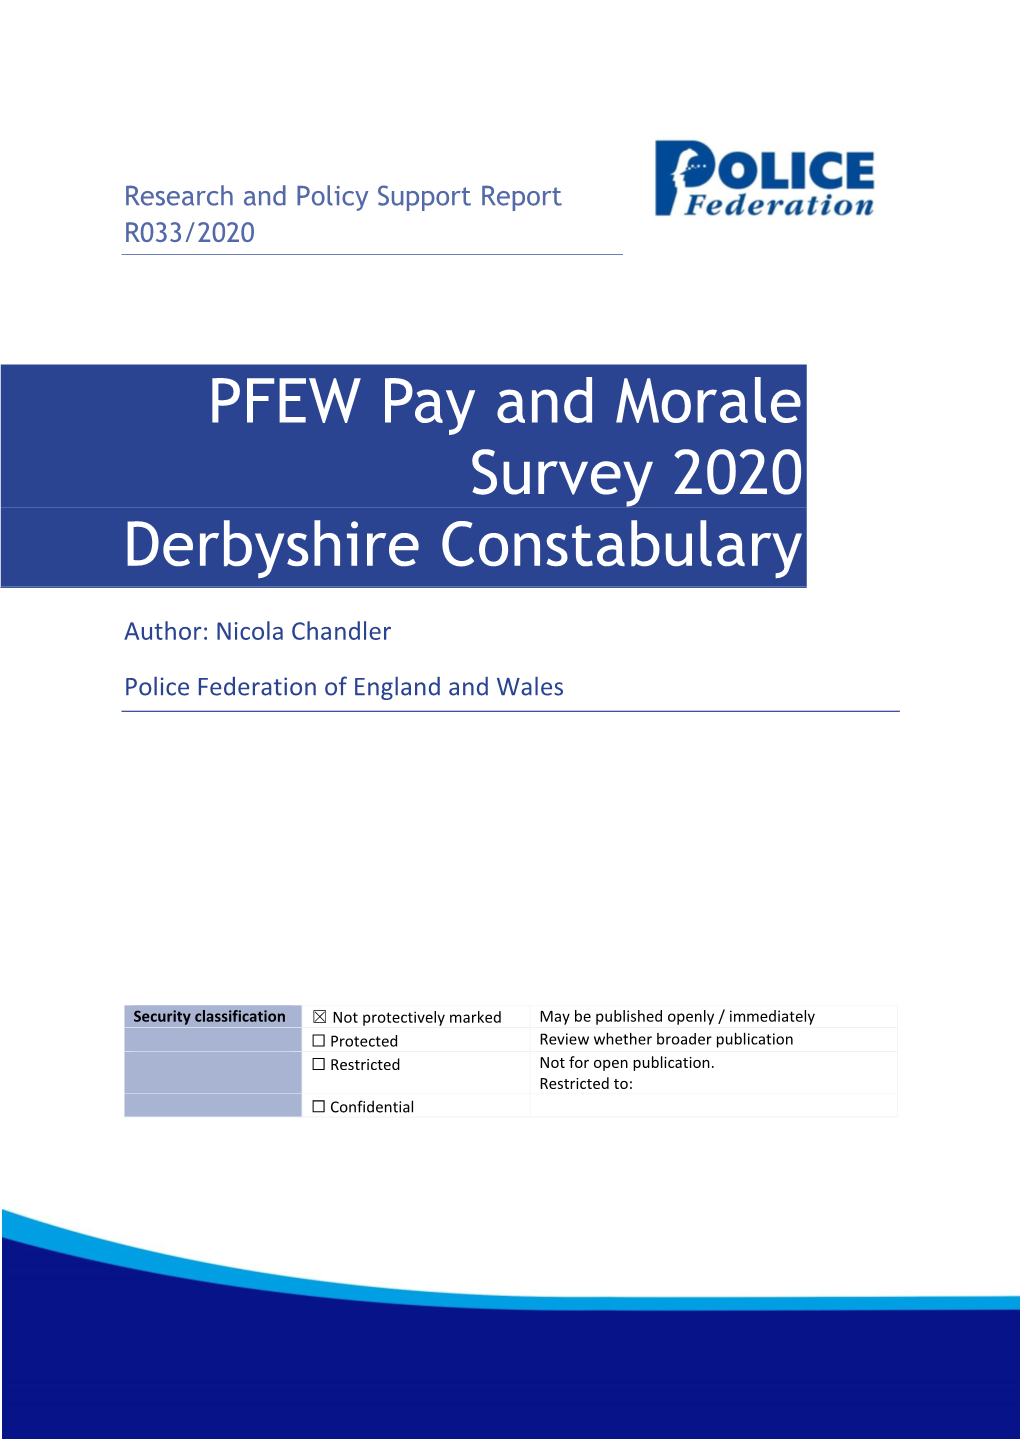 PFEW Pay and Morale Survey 2020 Derbyshire Constabulary